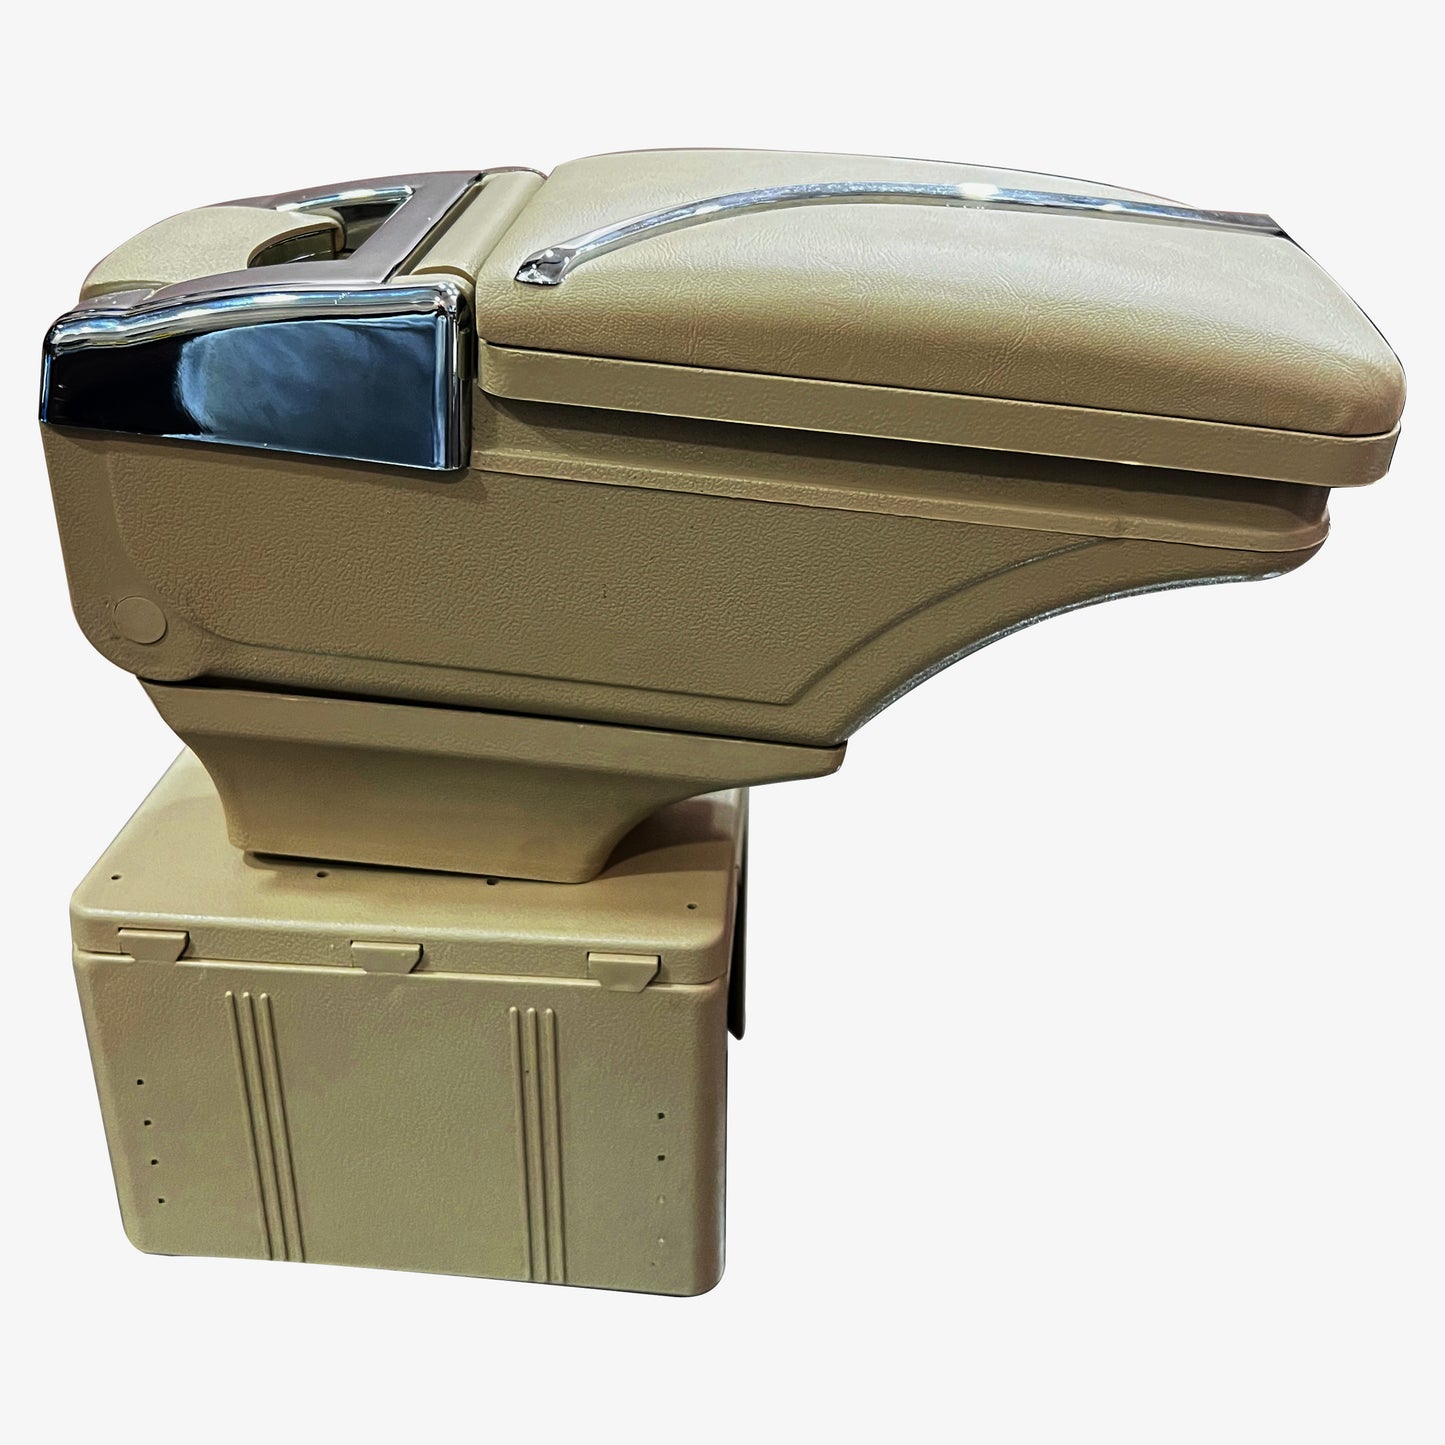 Oshotto PU Leather AR-02 Car Armrest Console Box for All Cars (Beige)